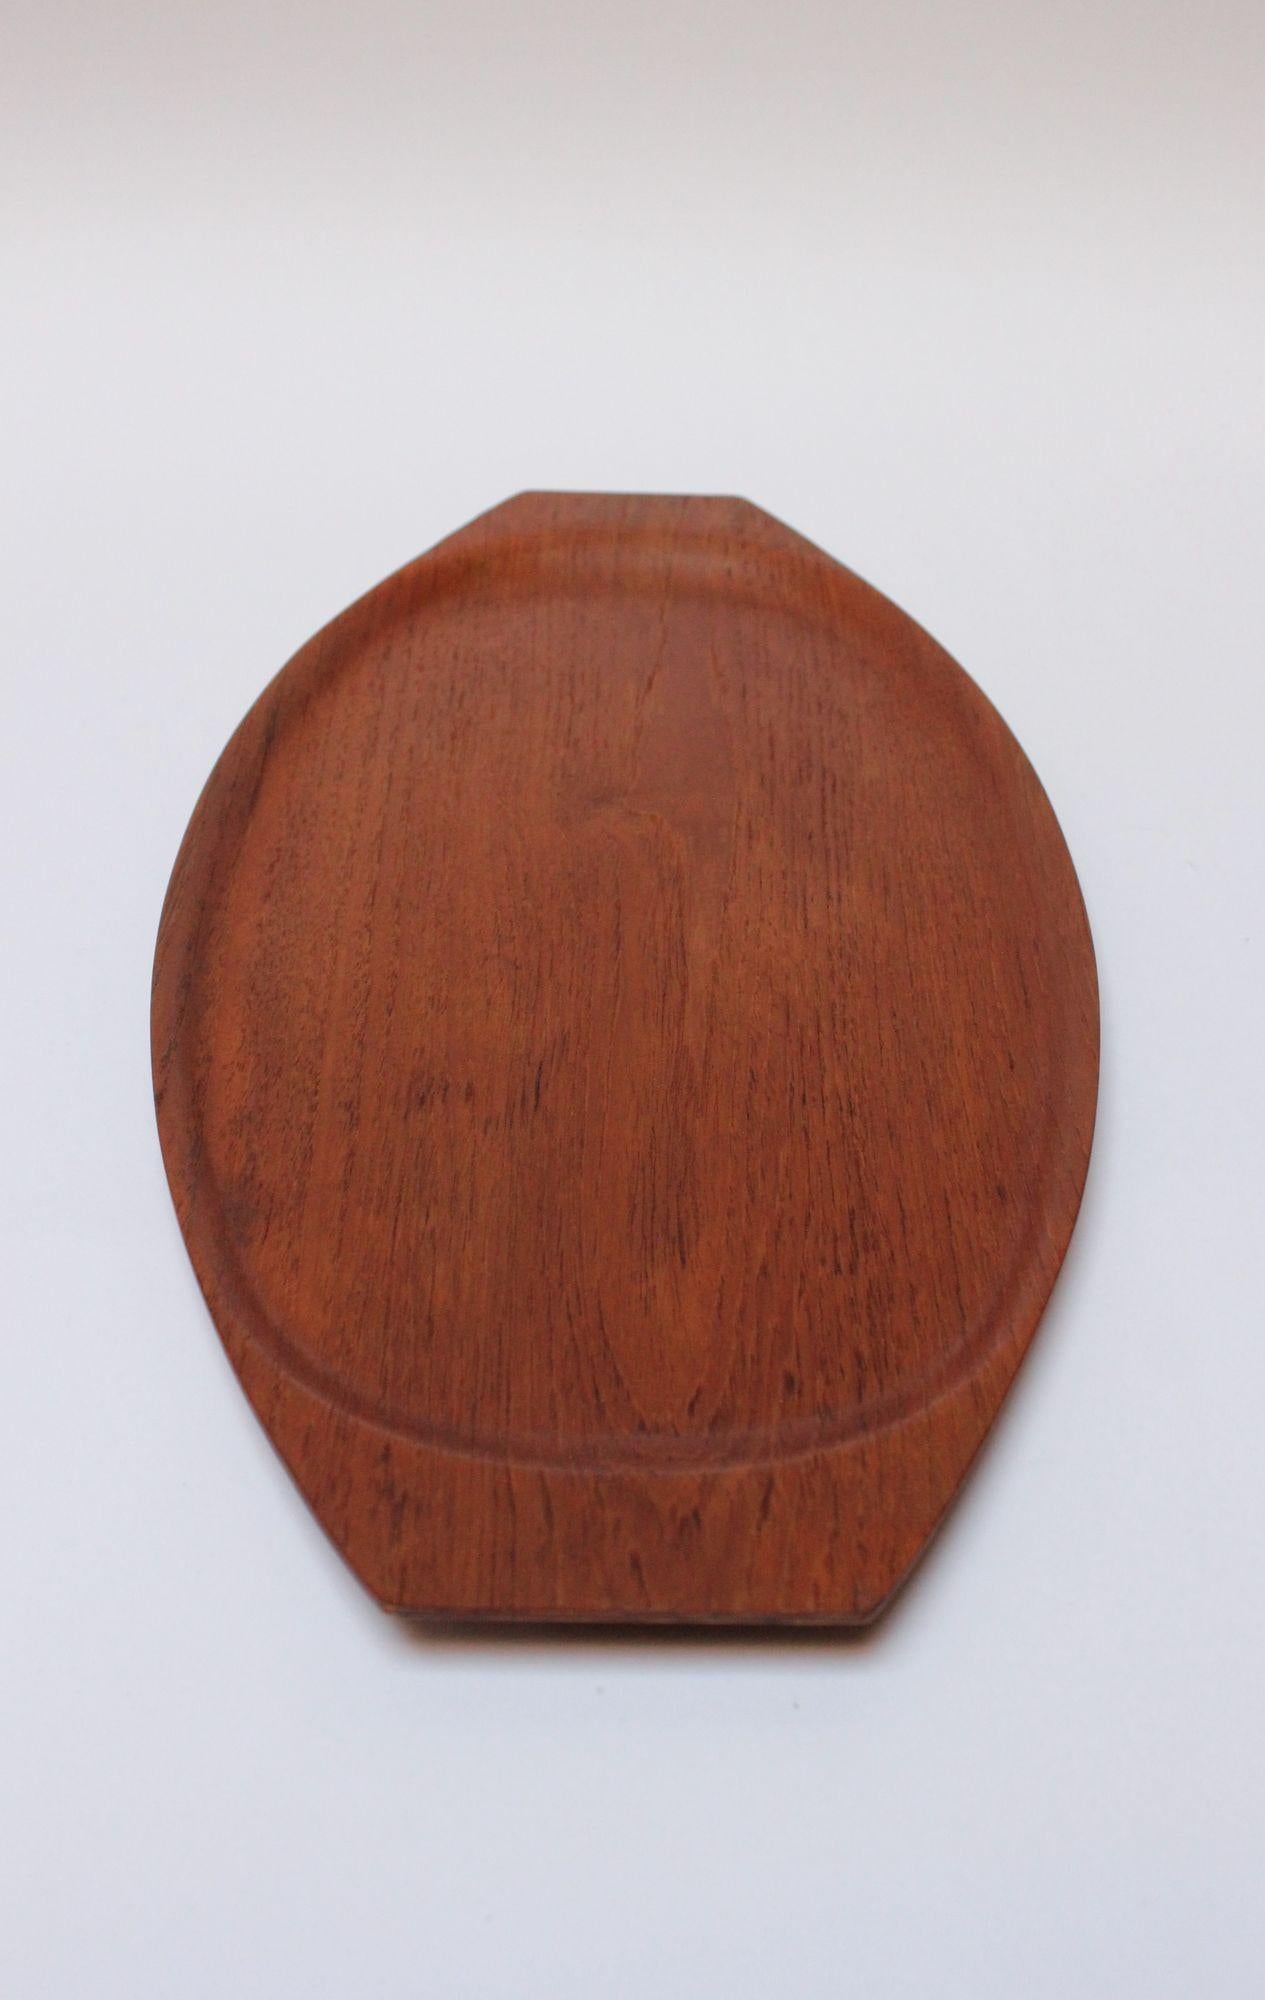 Gondola-form teakwood tray manufactured in the 1960s by Tapio Wirkkala for Kalmar of Sweden. 
Elegant, graceful form with rich color and vibrant teakwood grain. 
Conservatively refinished condition with only one spot of edge wear, as